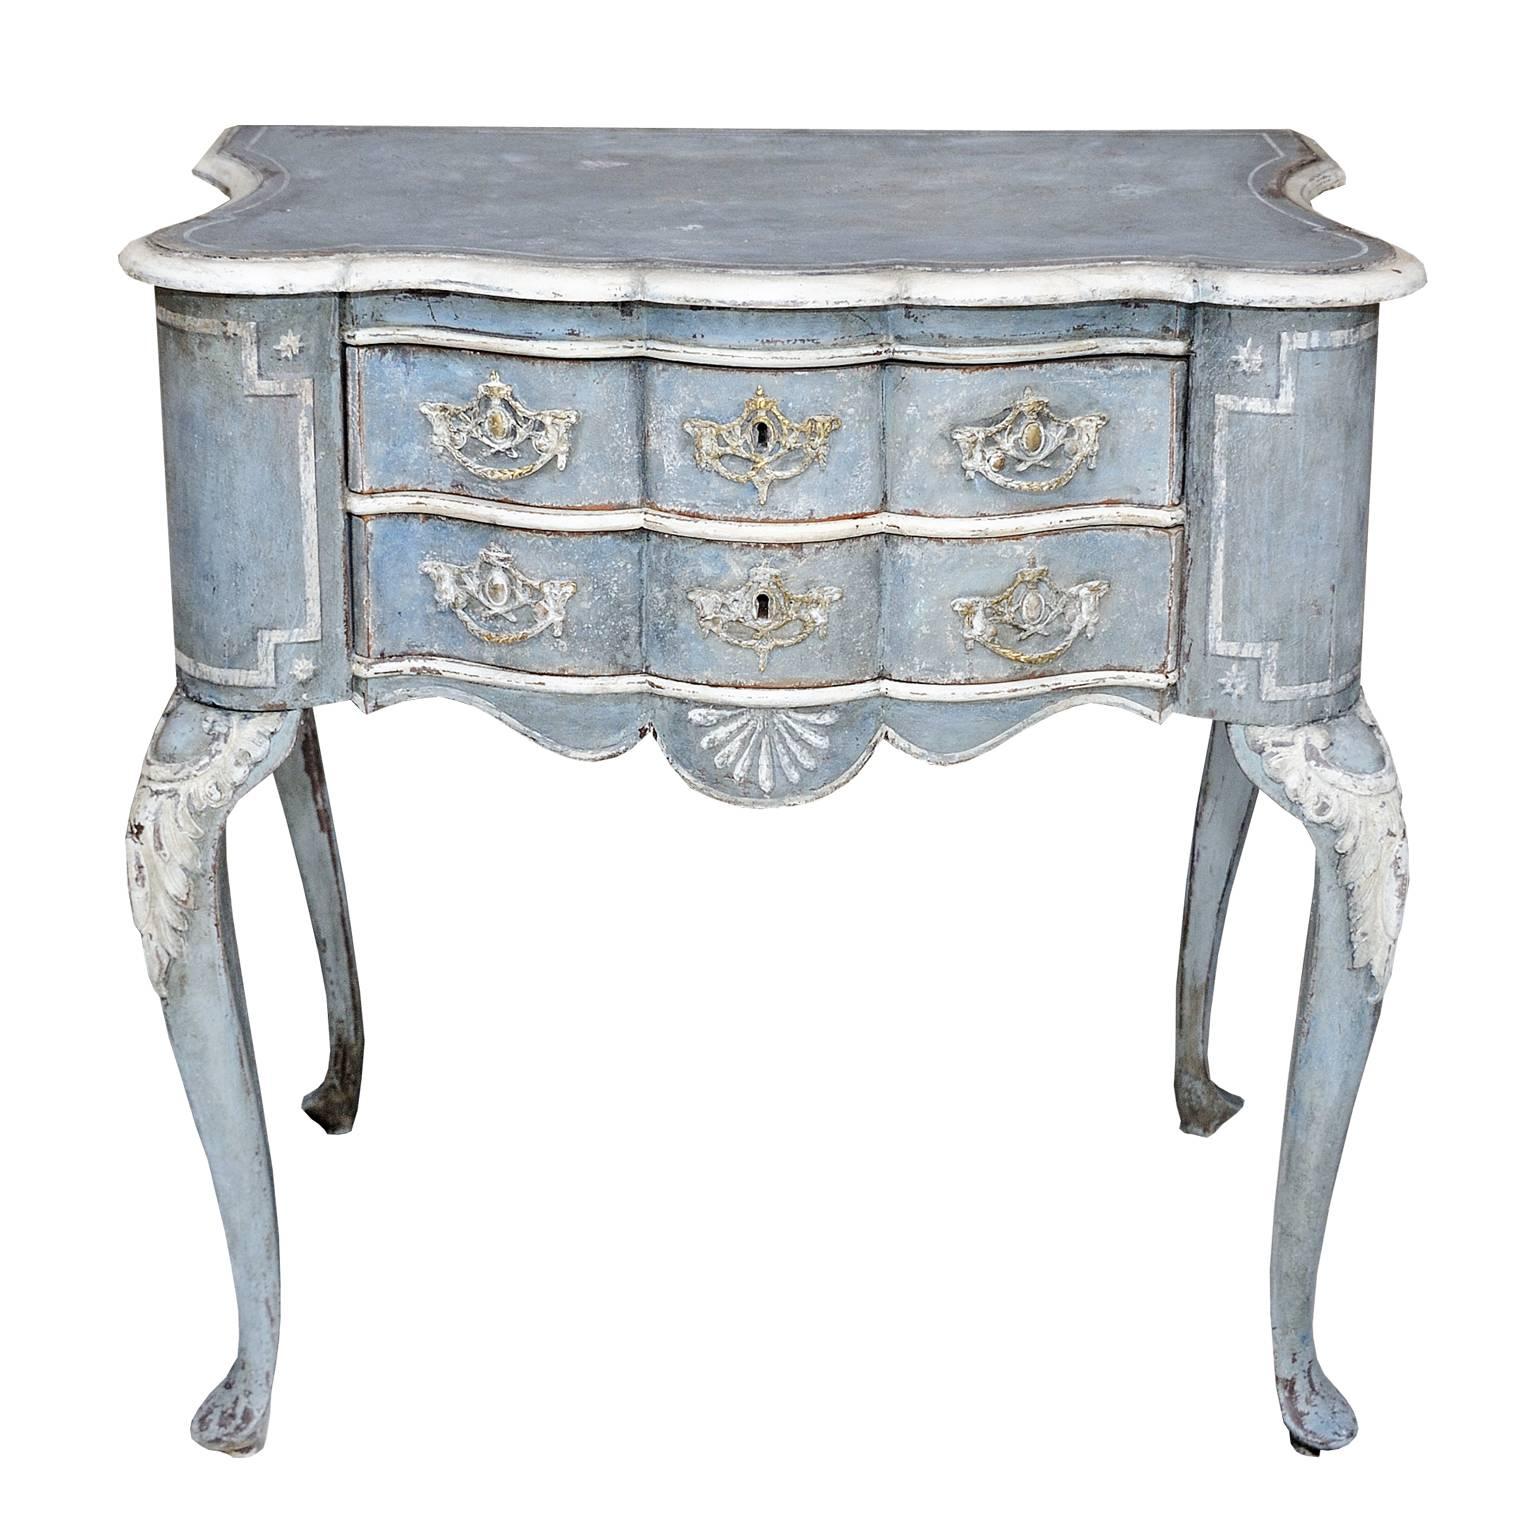 This is a rather charming Dutch 18th century style painted lowboy or side table featuring carved cabriole legs and decorative design features, shaped front and sides with brass handles, circa 1860.